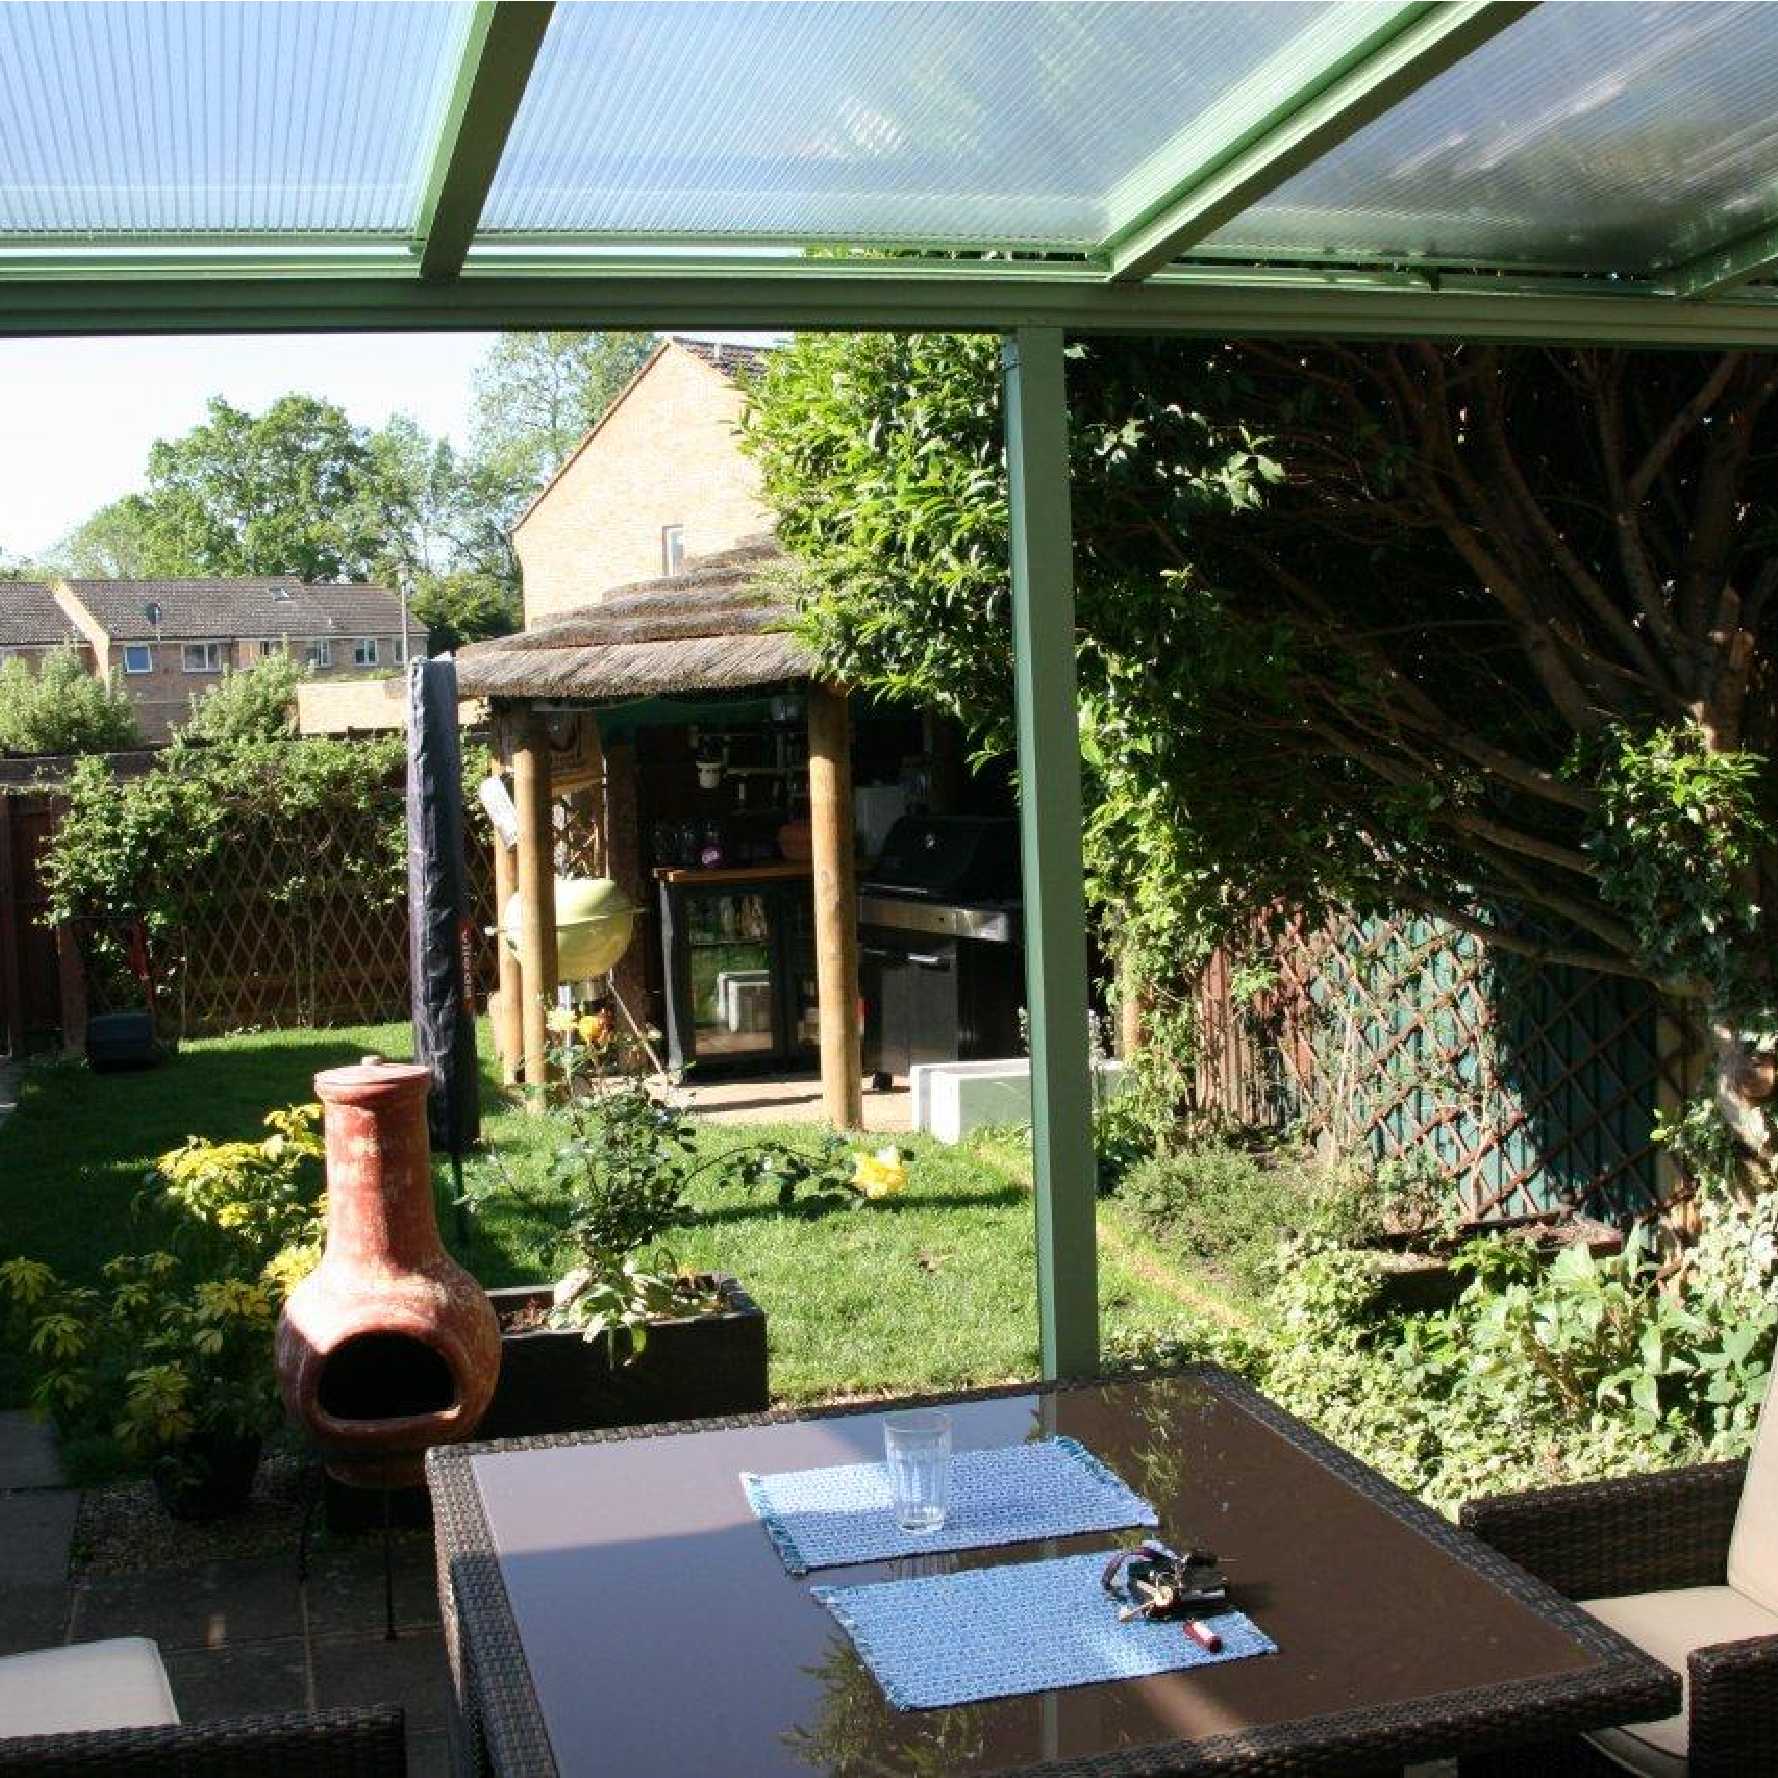 Affordable Omega Smart Lean-To Canopy, White with 16mm Polycarbonate Glazing - 3.5m (W) x 4.0m (P), (3) Supporting Posts